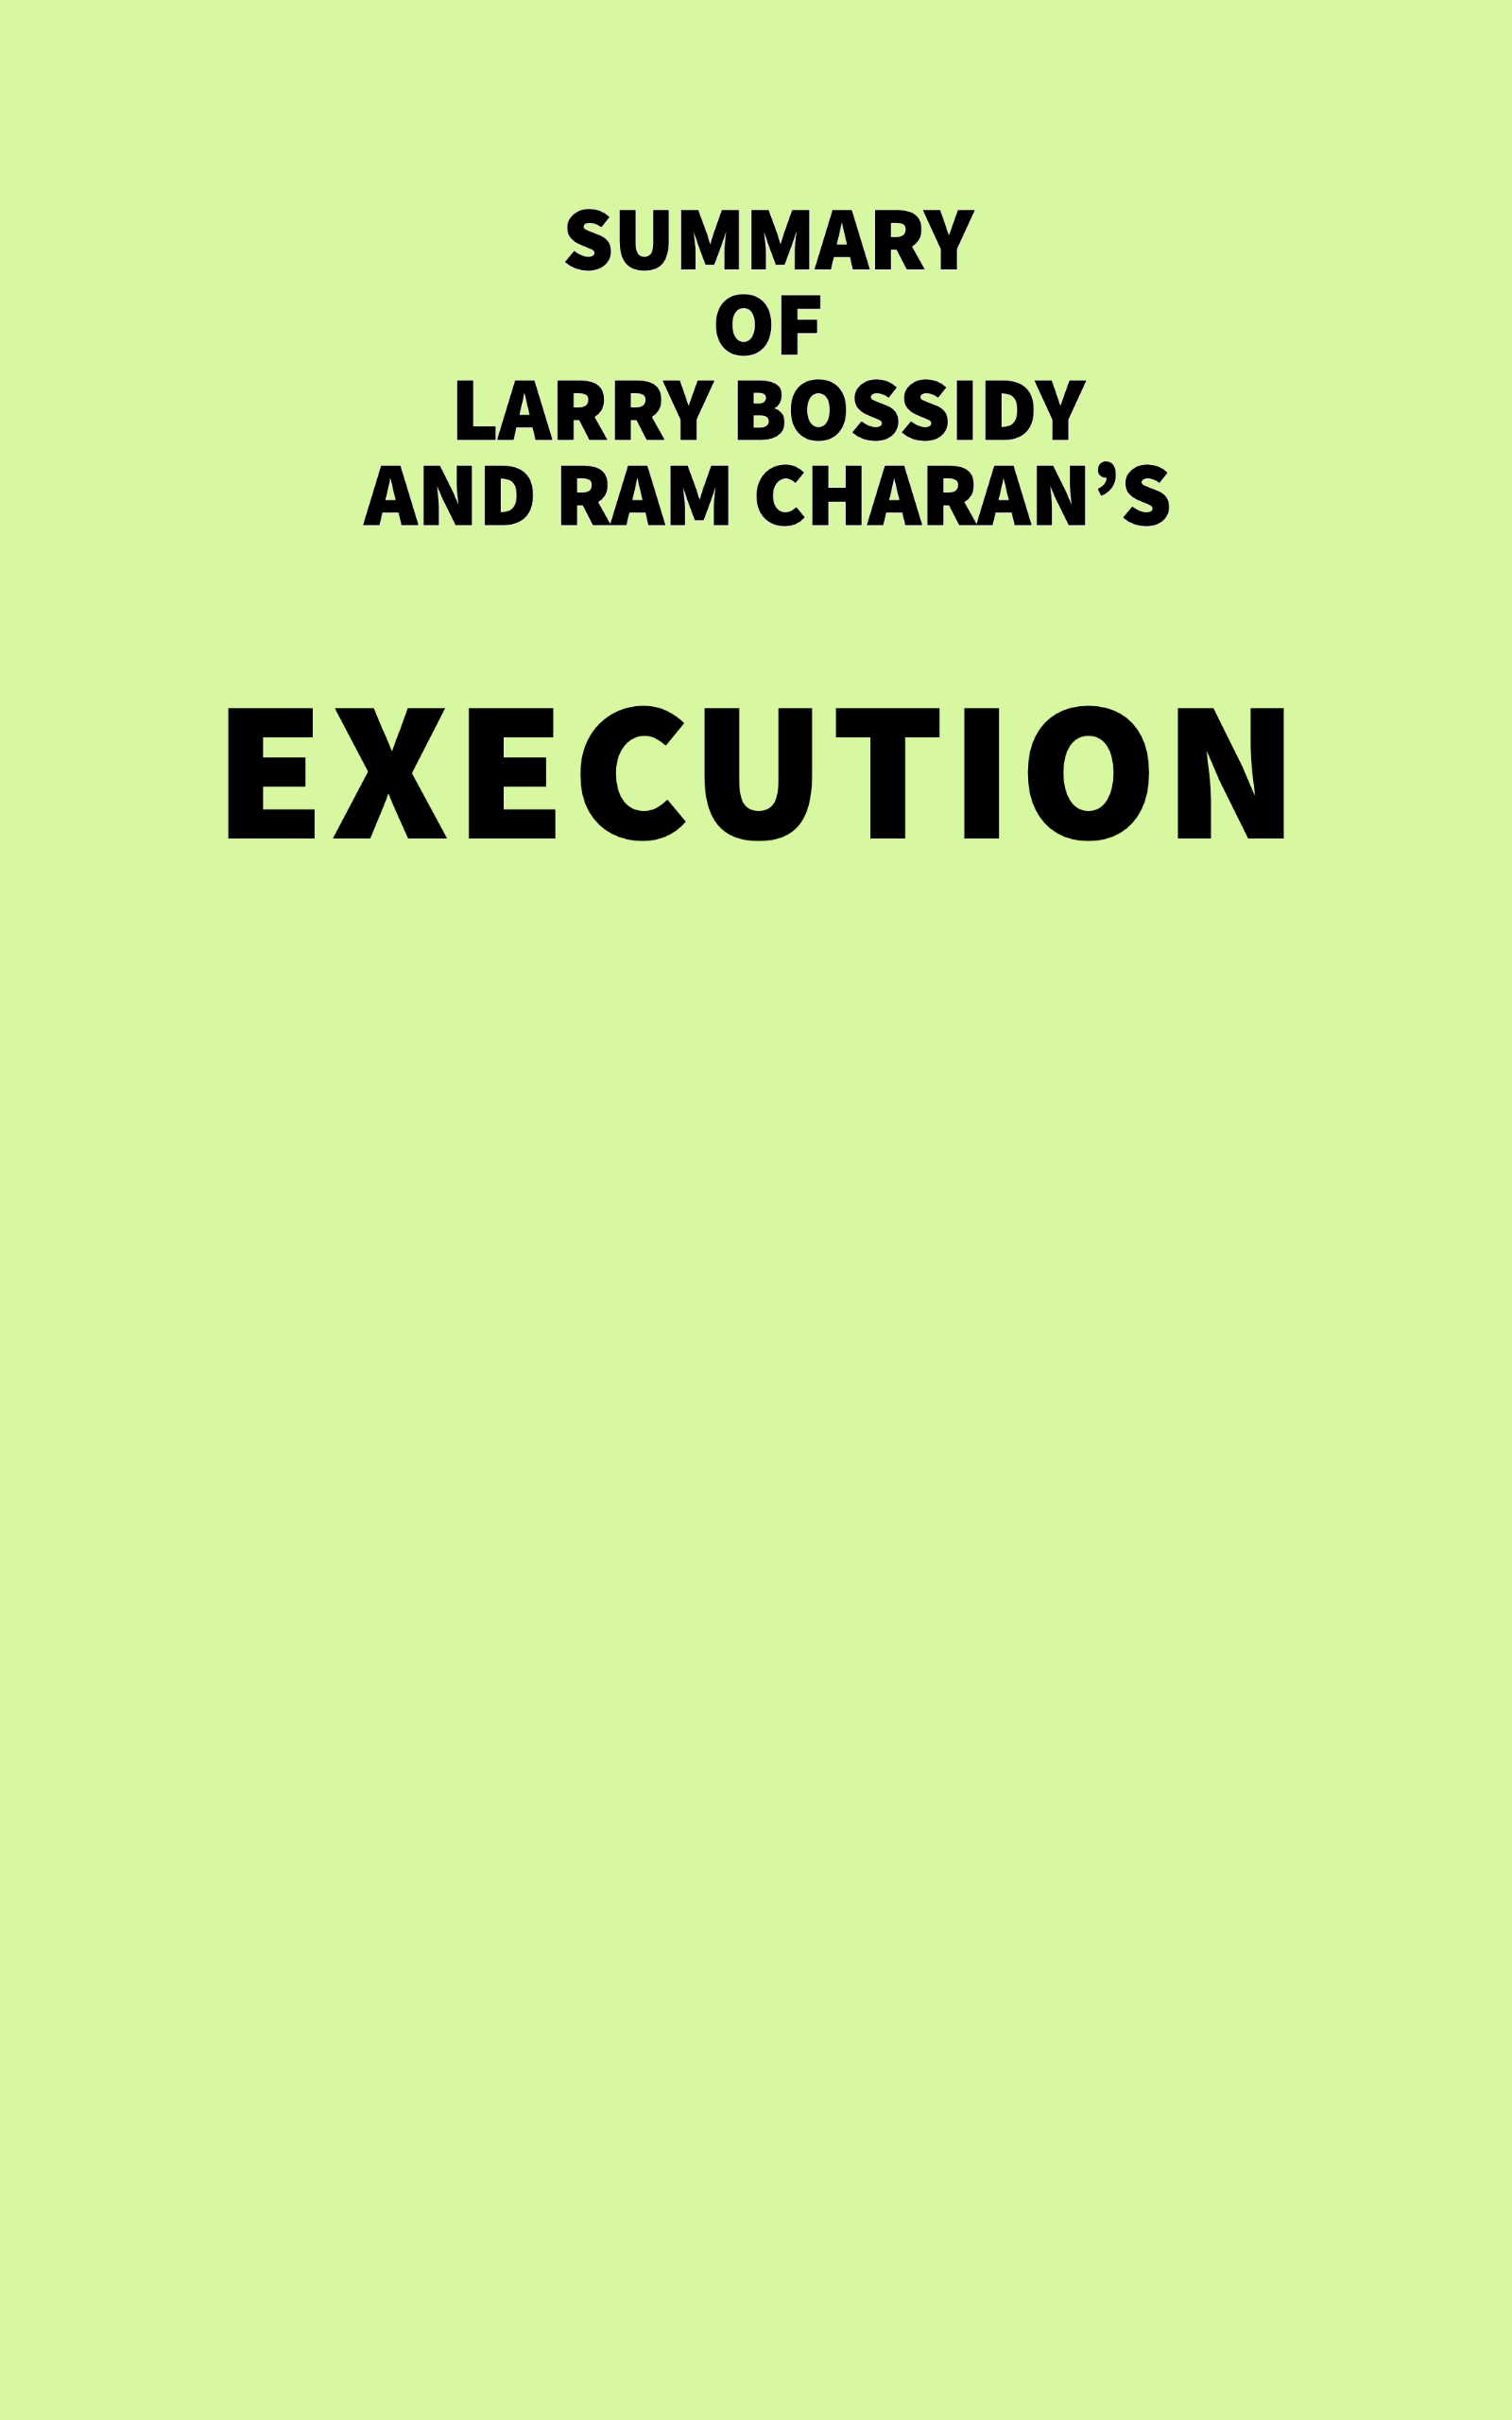 Summary of Larry Bossidy and Ram Charan's Execution